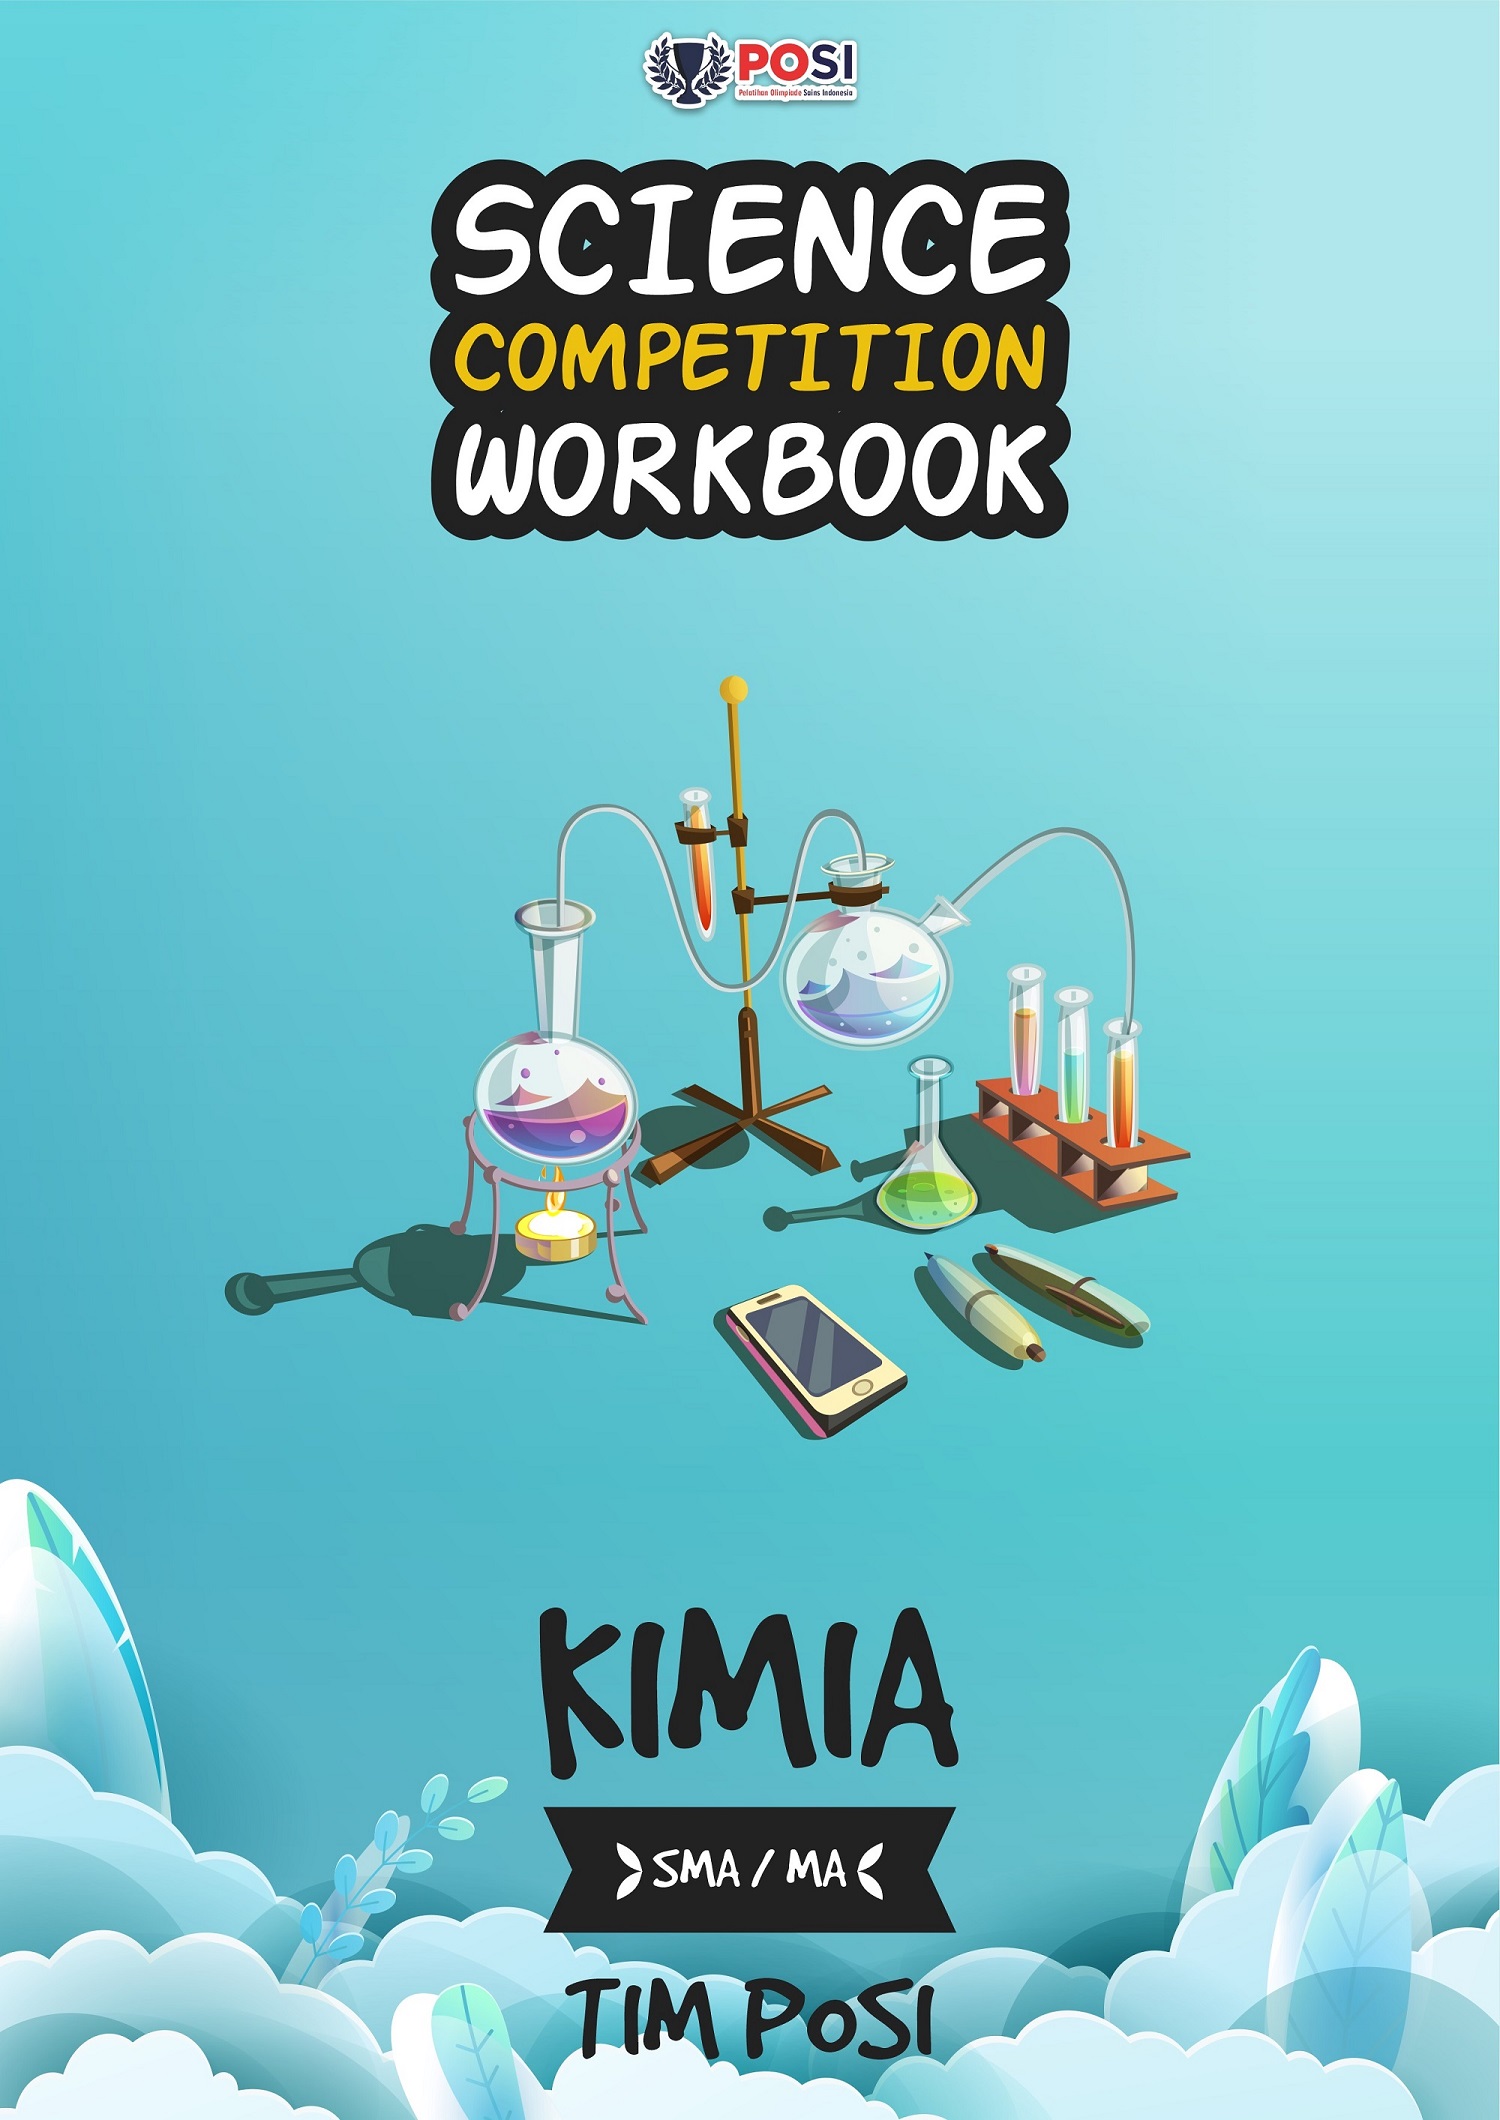 Science competition workbook : kimia